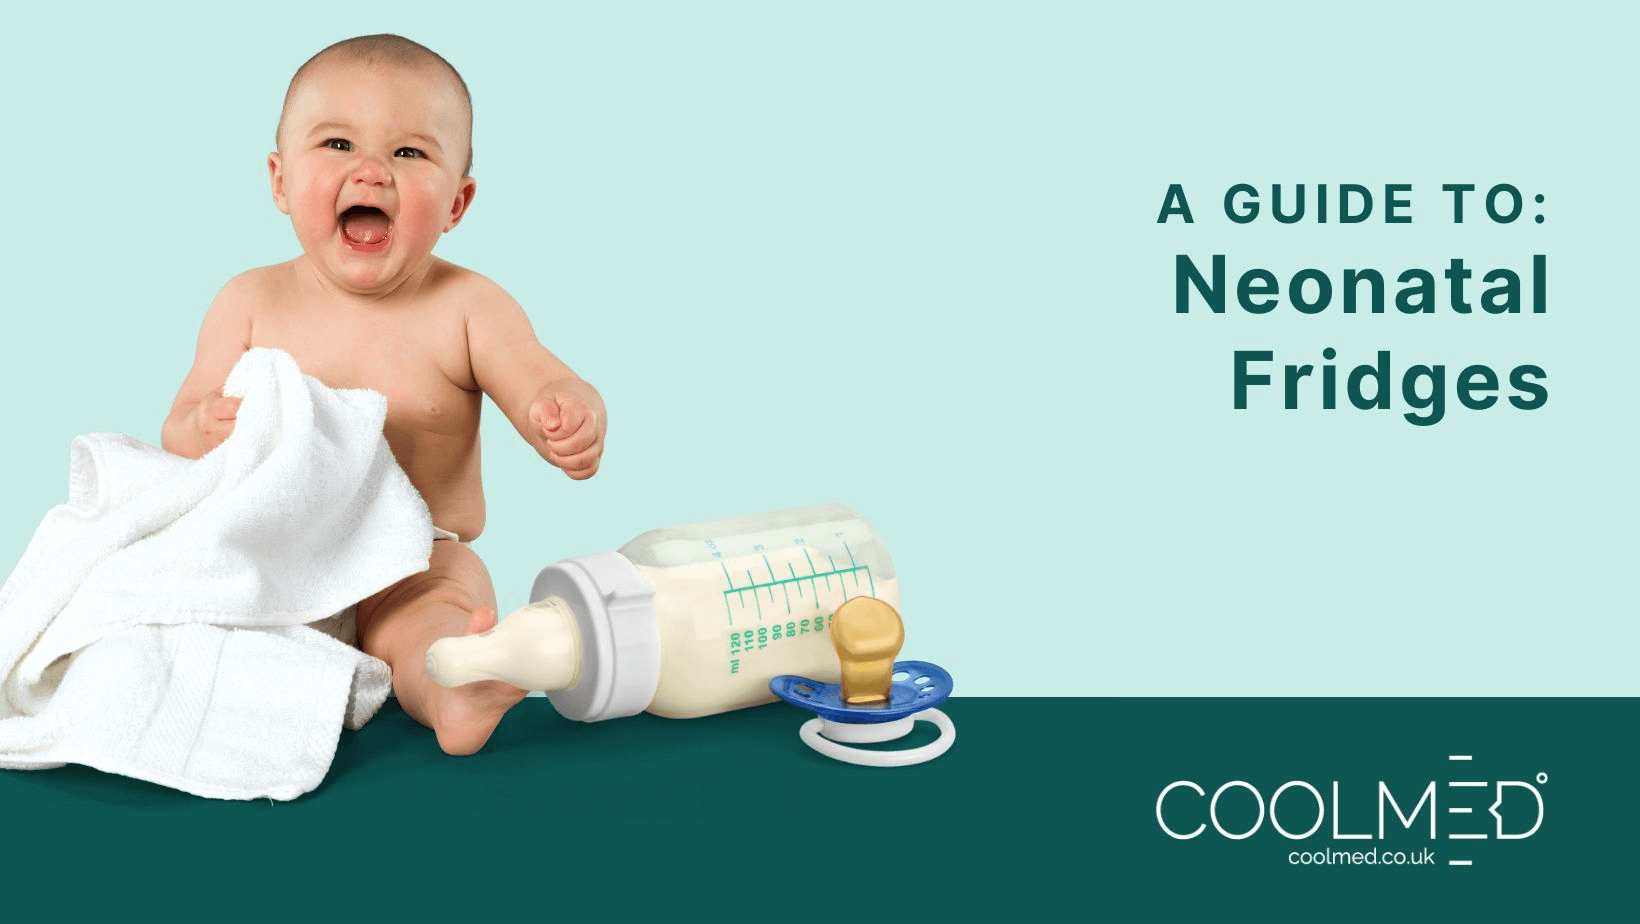 A guide to neonatal fridges graphic created by CoolMed. the graphic shows a baby and a baby bottle full of milk.